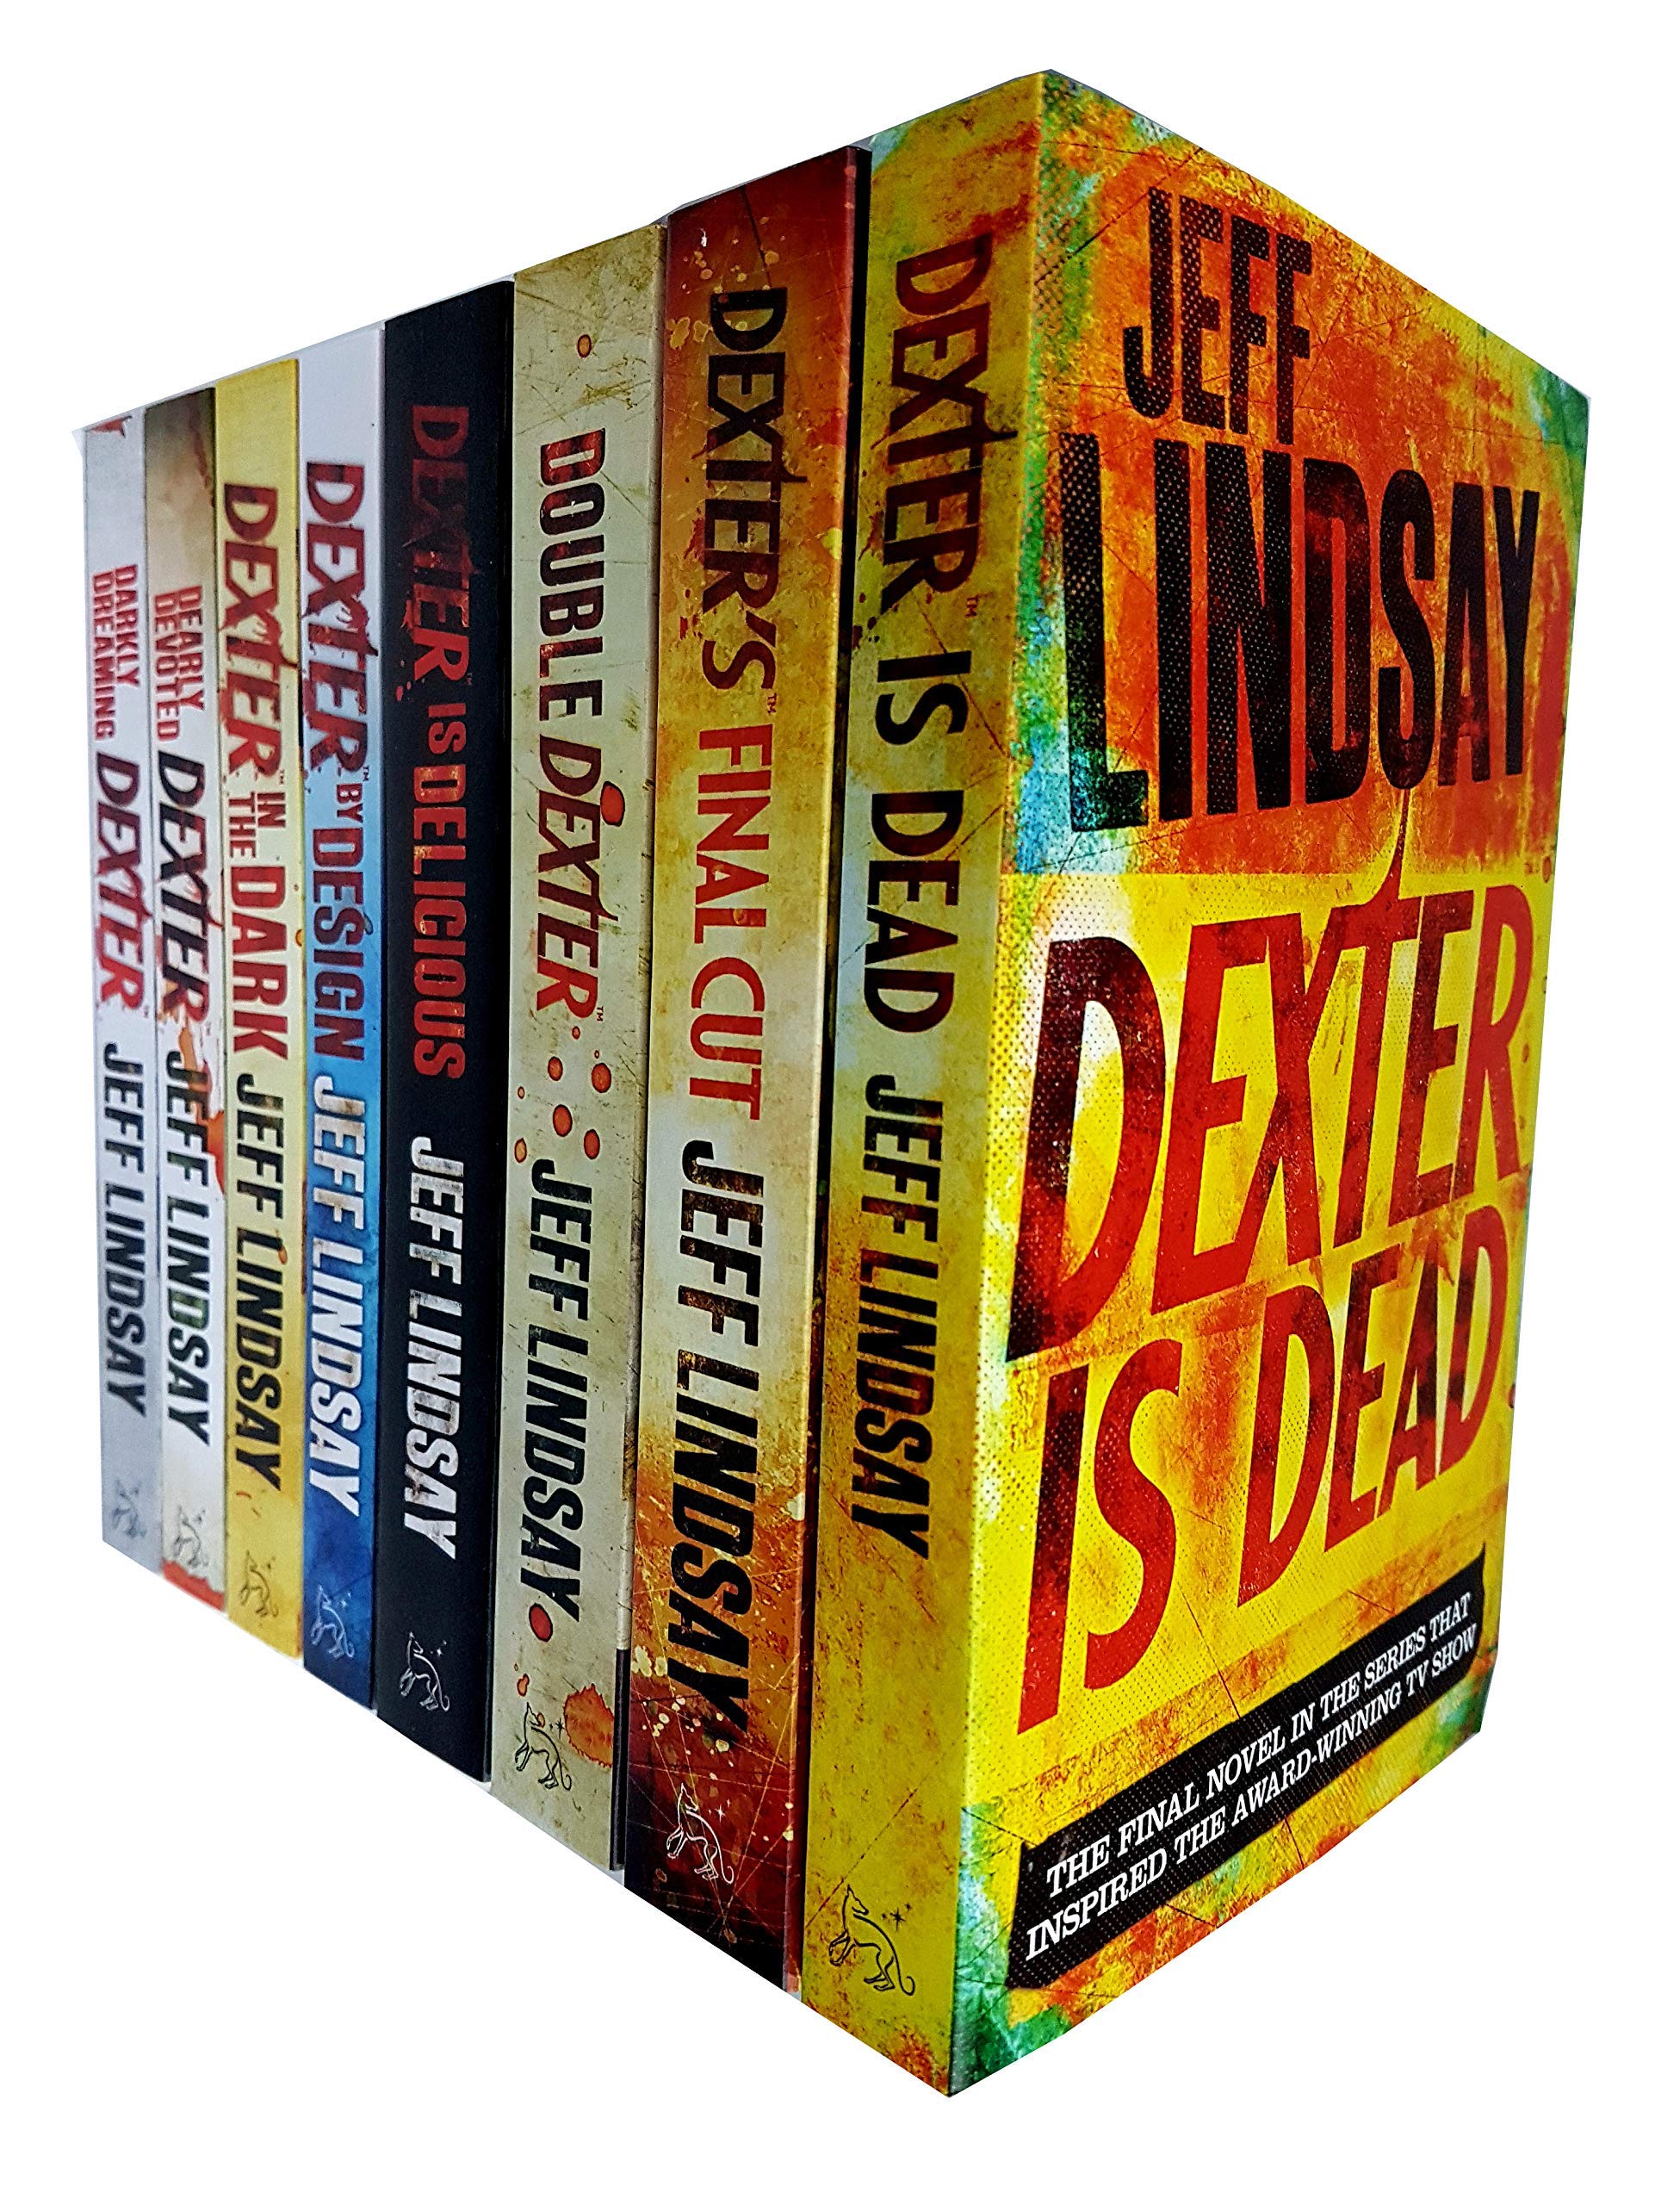 Dexter Series Books 1 - 8 Complete Collection Set by Jeff Lindsay Dexter in the dark - Lets Buy Books